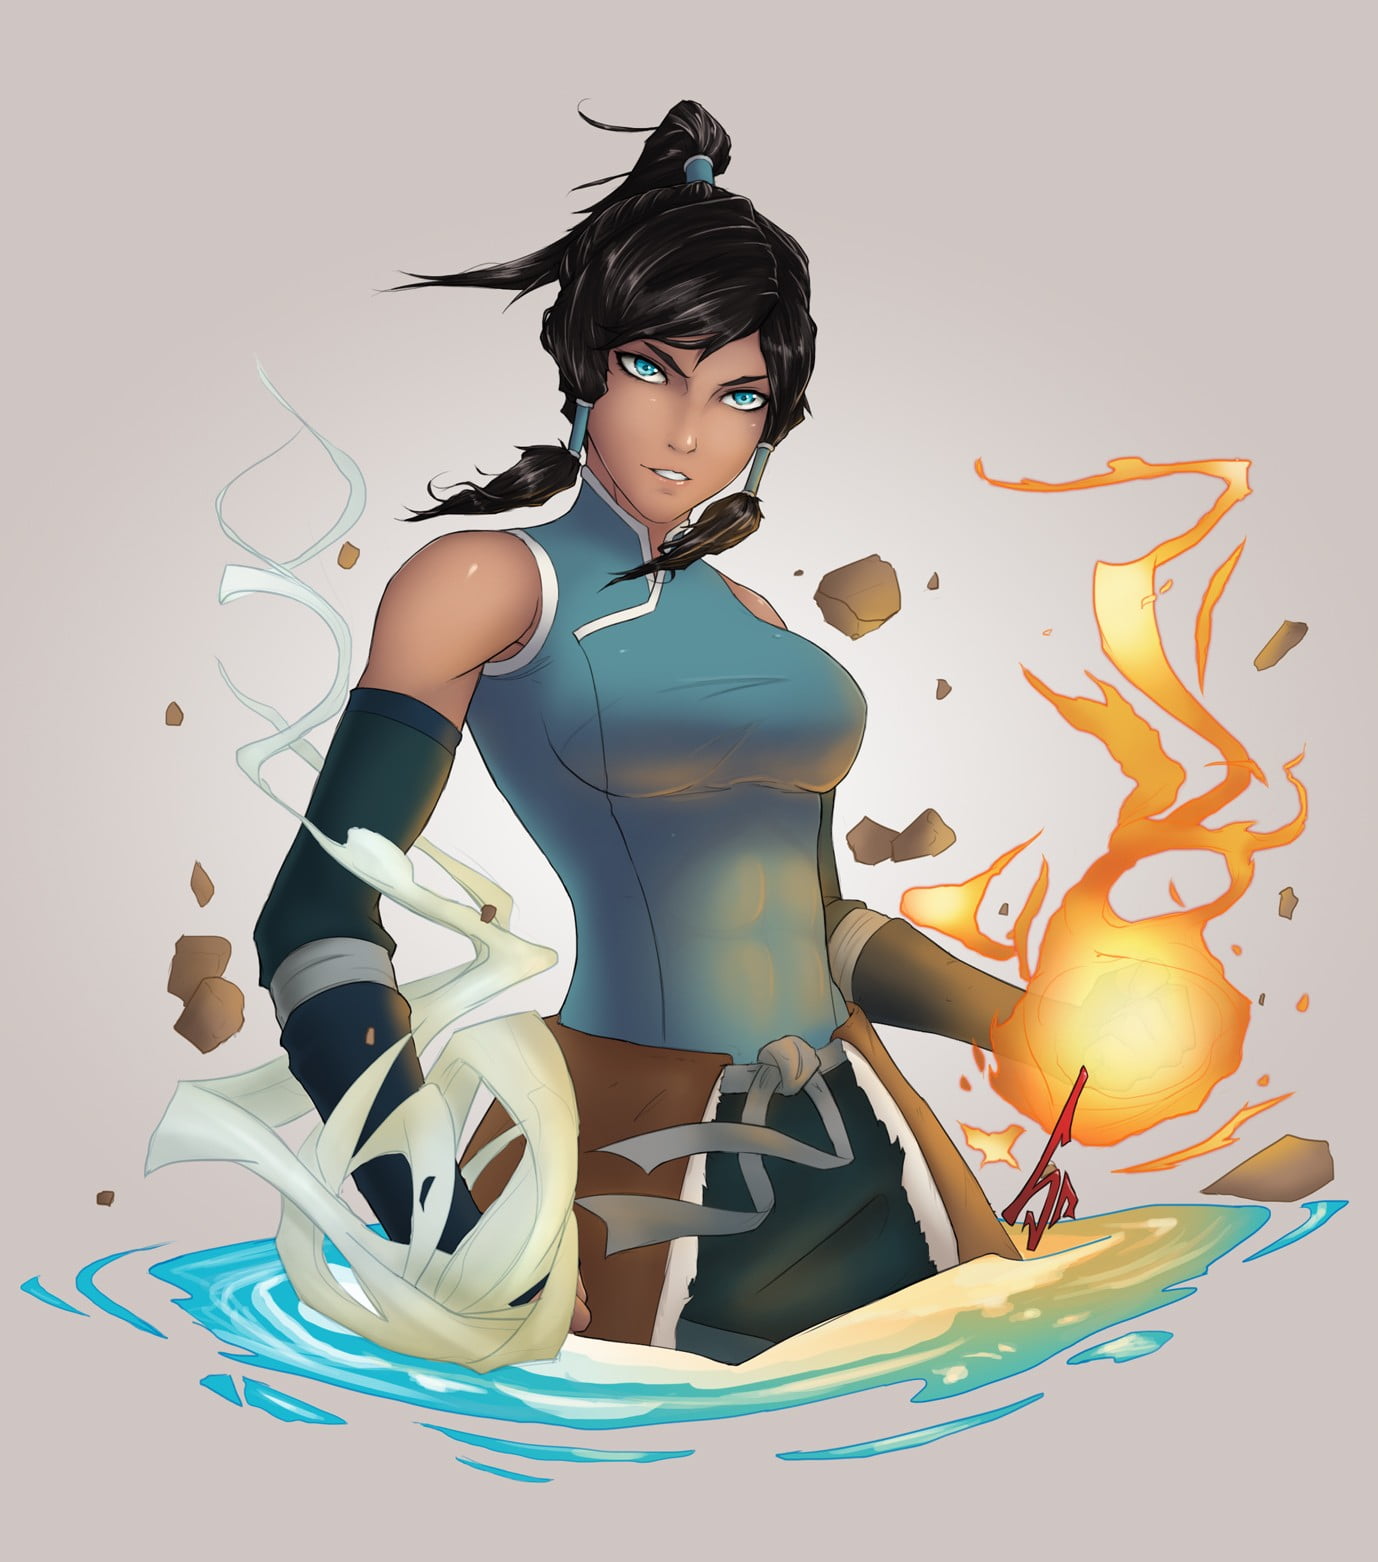 Korra, The Legend of Korra, one person, women, young adult